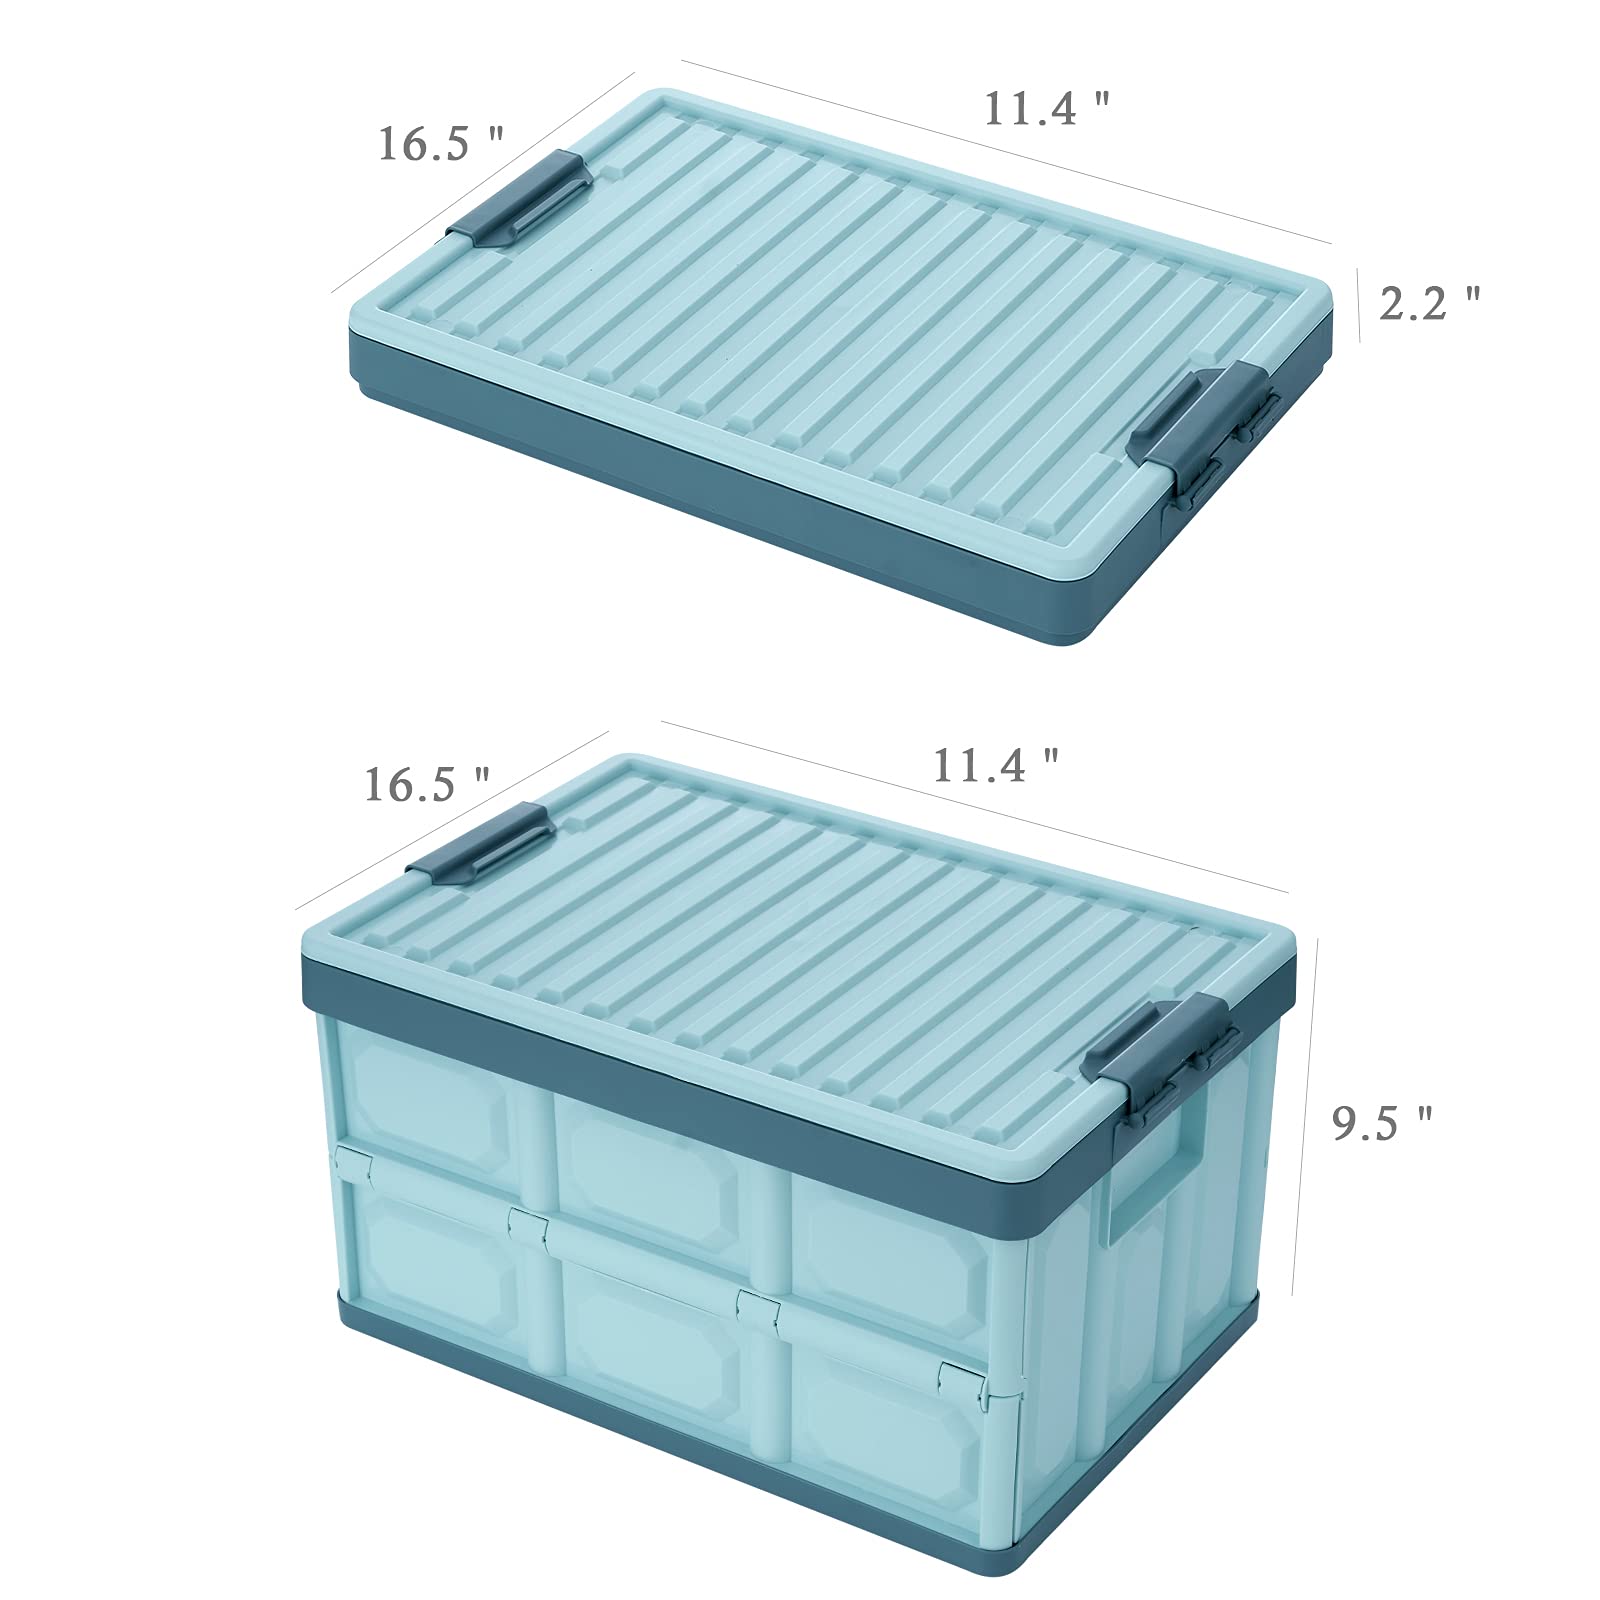 JUJIAJIA Blue Folding Plastic Stackable Utility Crates 2-Pack, Collapsible Storage Bins with Lids 30L, Durable Containers for Home & Garage Organization